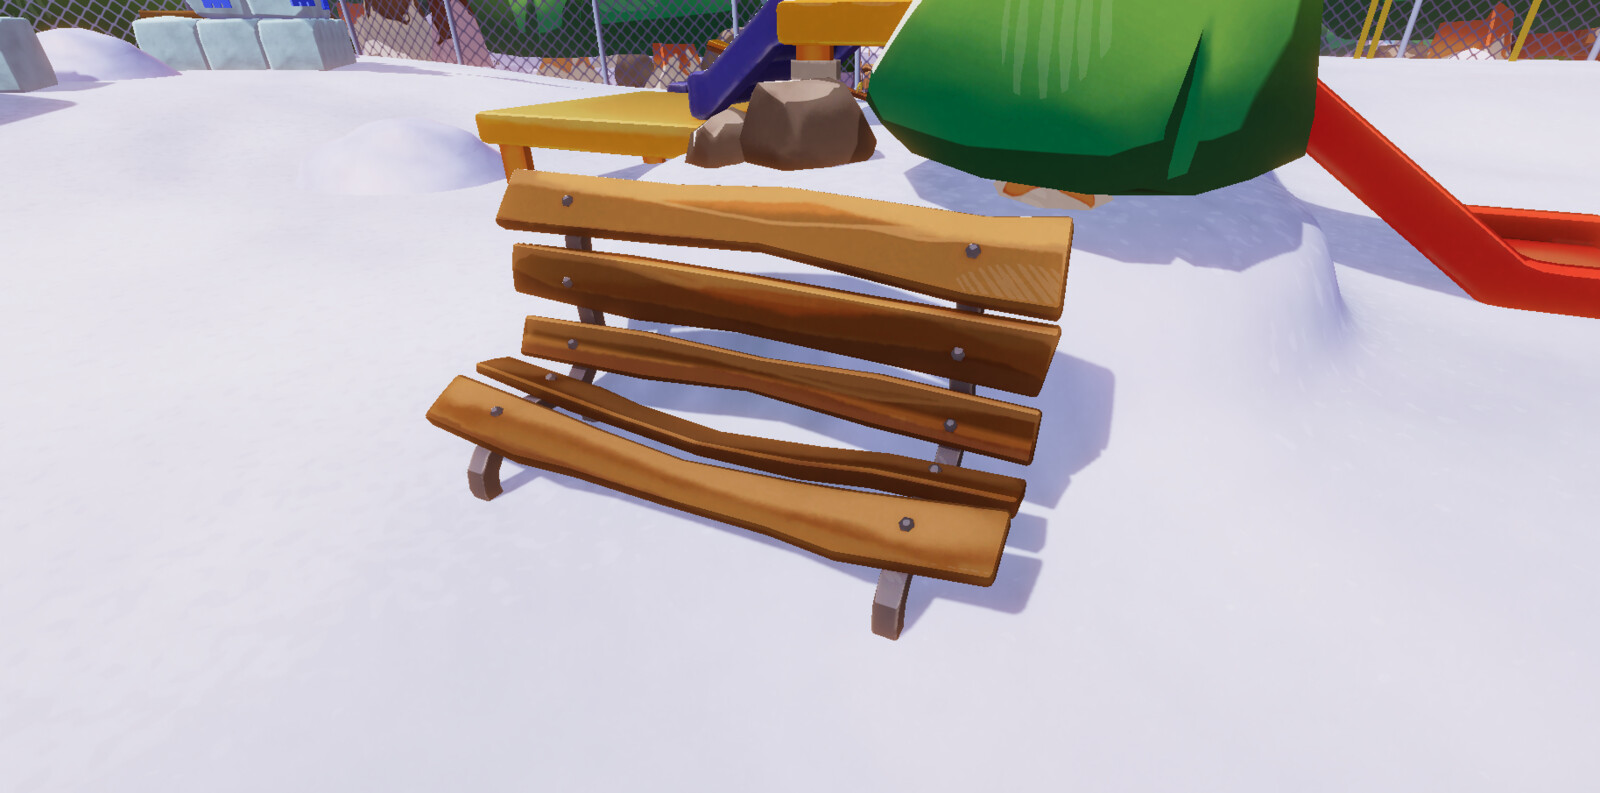 In-game bench